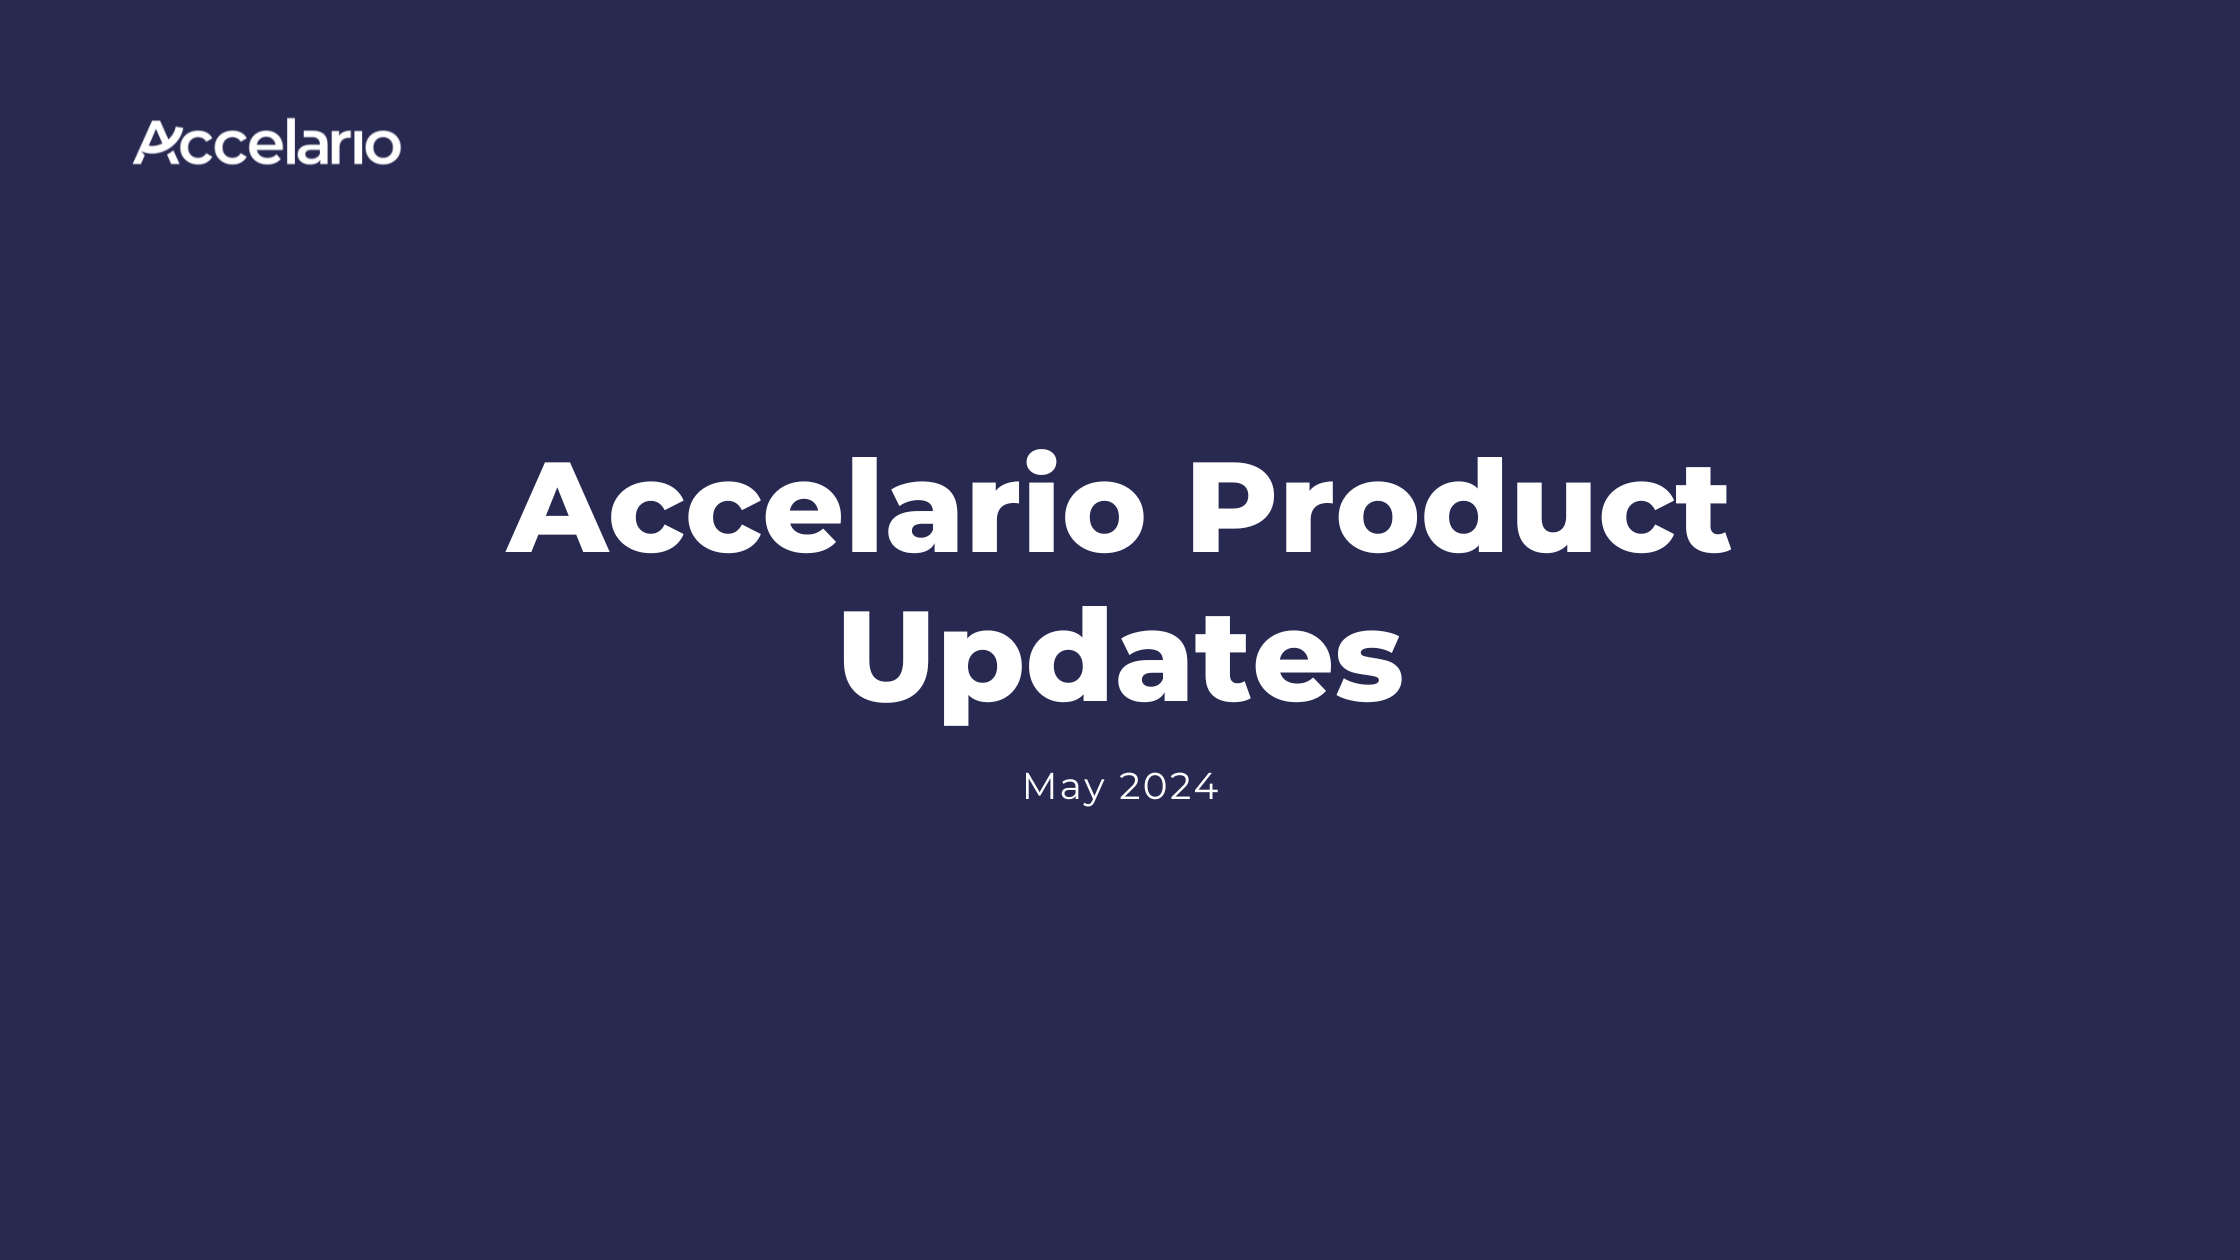 New Product Updates to the Accelario Database Virtualization and Data Anonymization Solutions